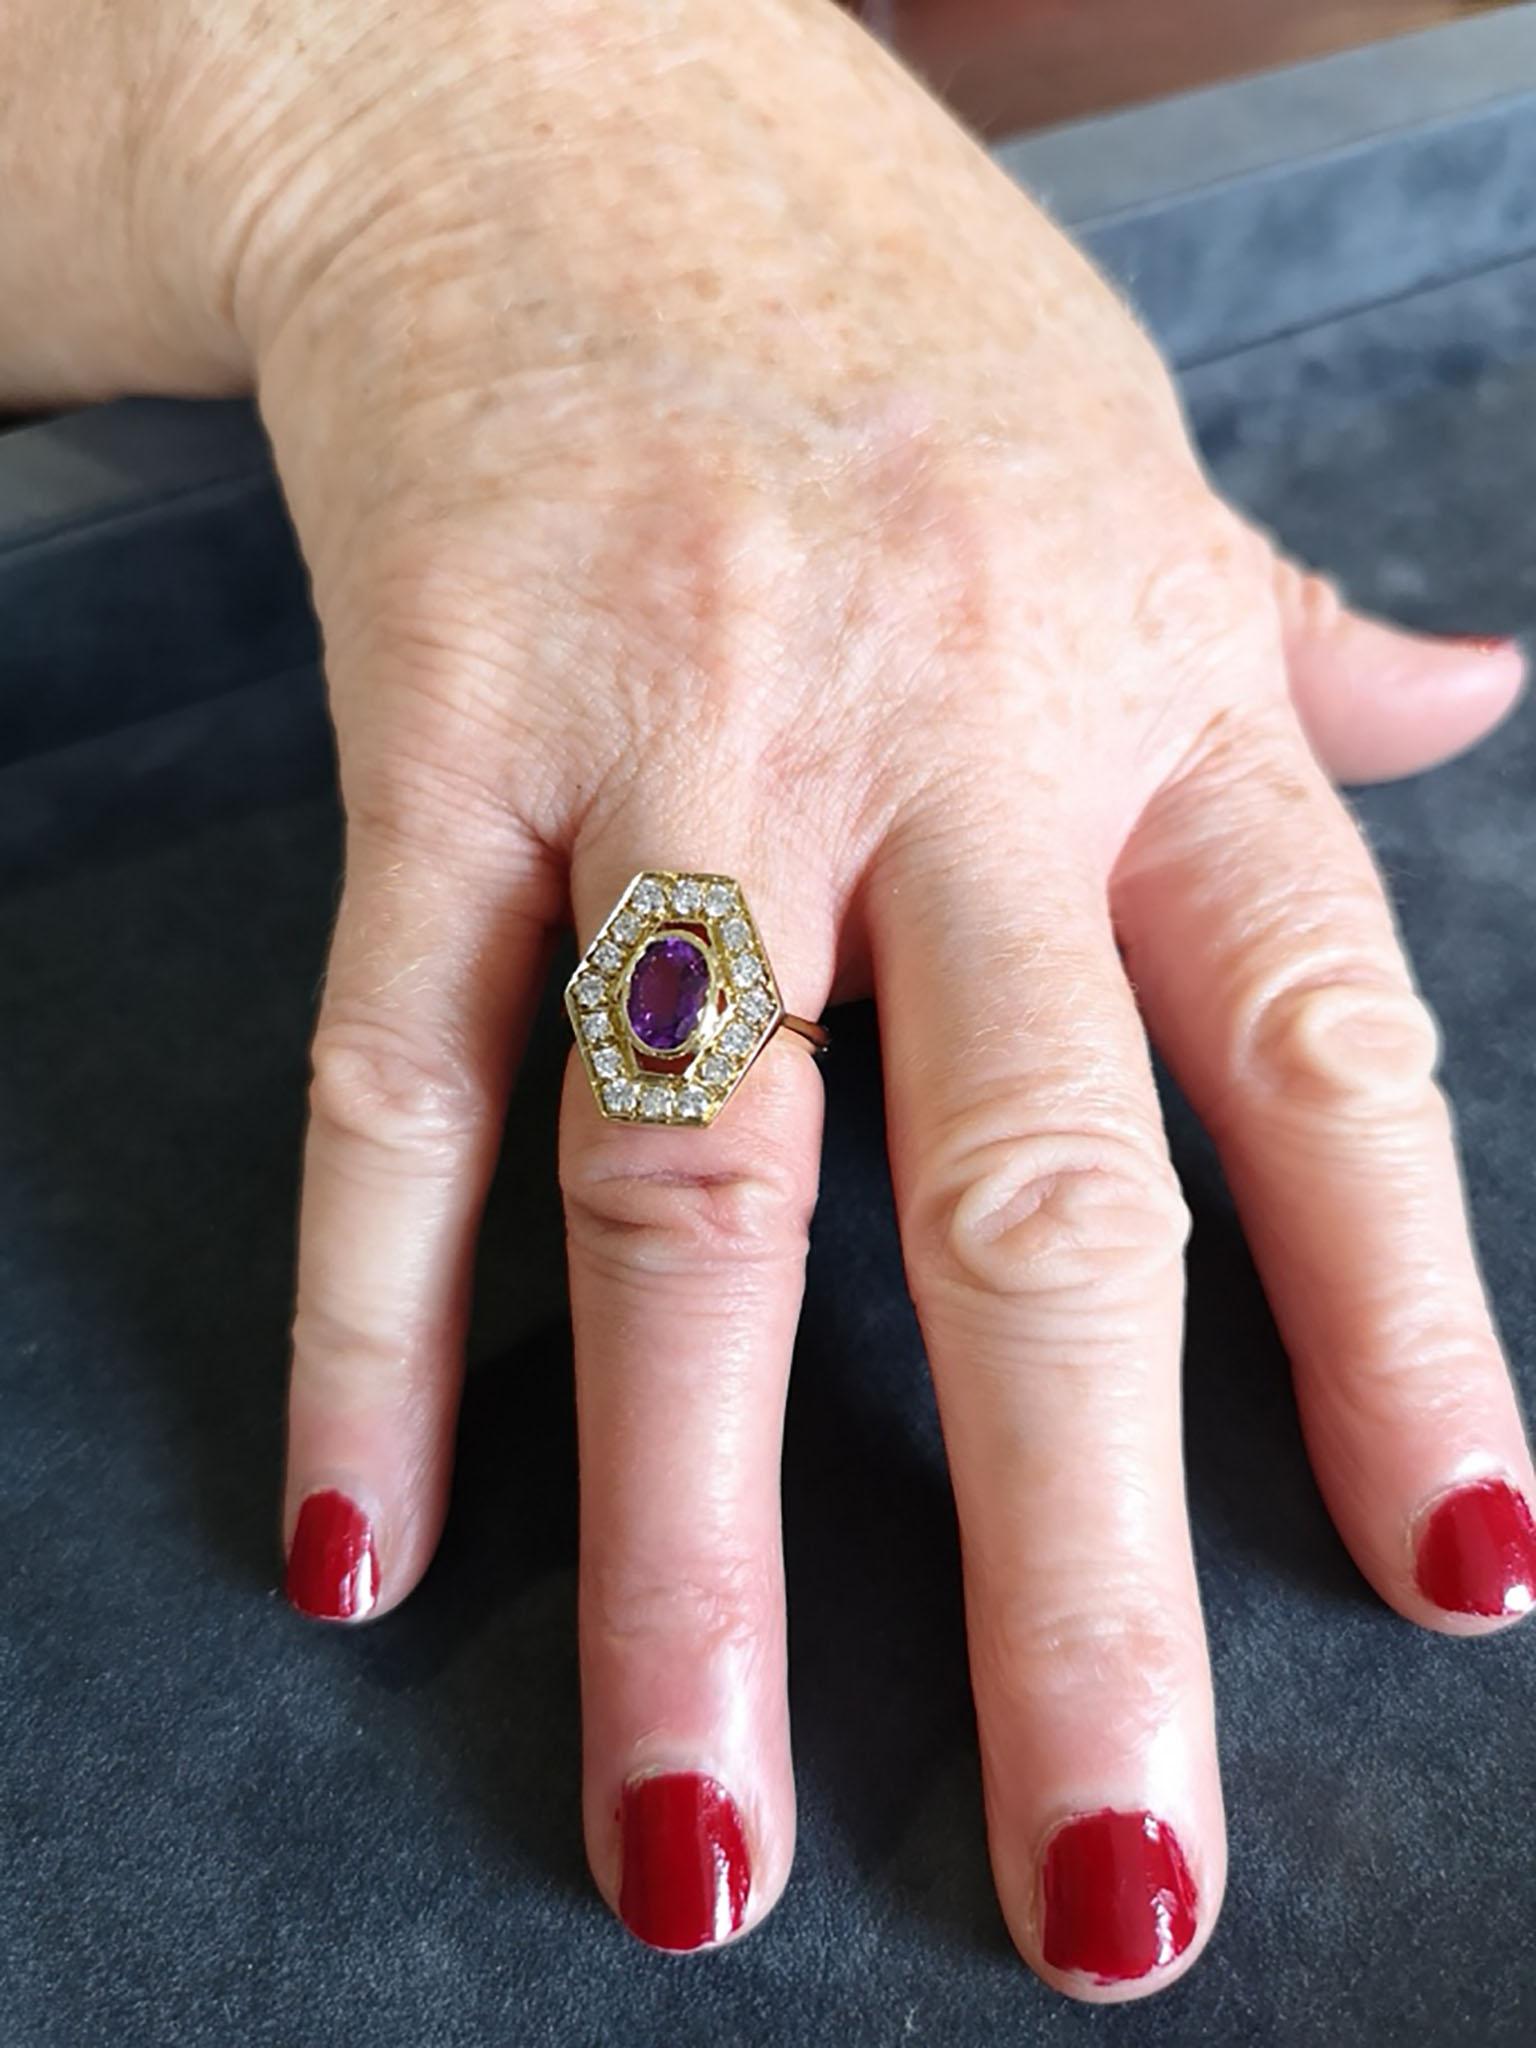 A very unusual and super stylish openwork amethyst and diamond cocktail ring. The central deep purple, oval-cut amethyst of approximately 1.25 carats mounted in an 18-carat yellow gold bezel, surrounded by a hexagonal single row of bead-set